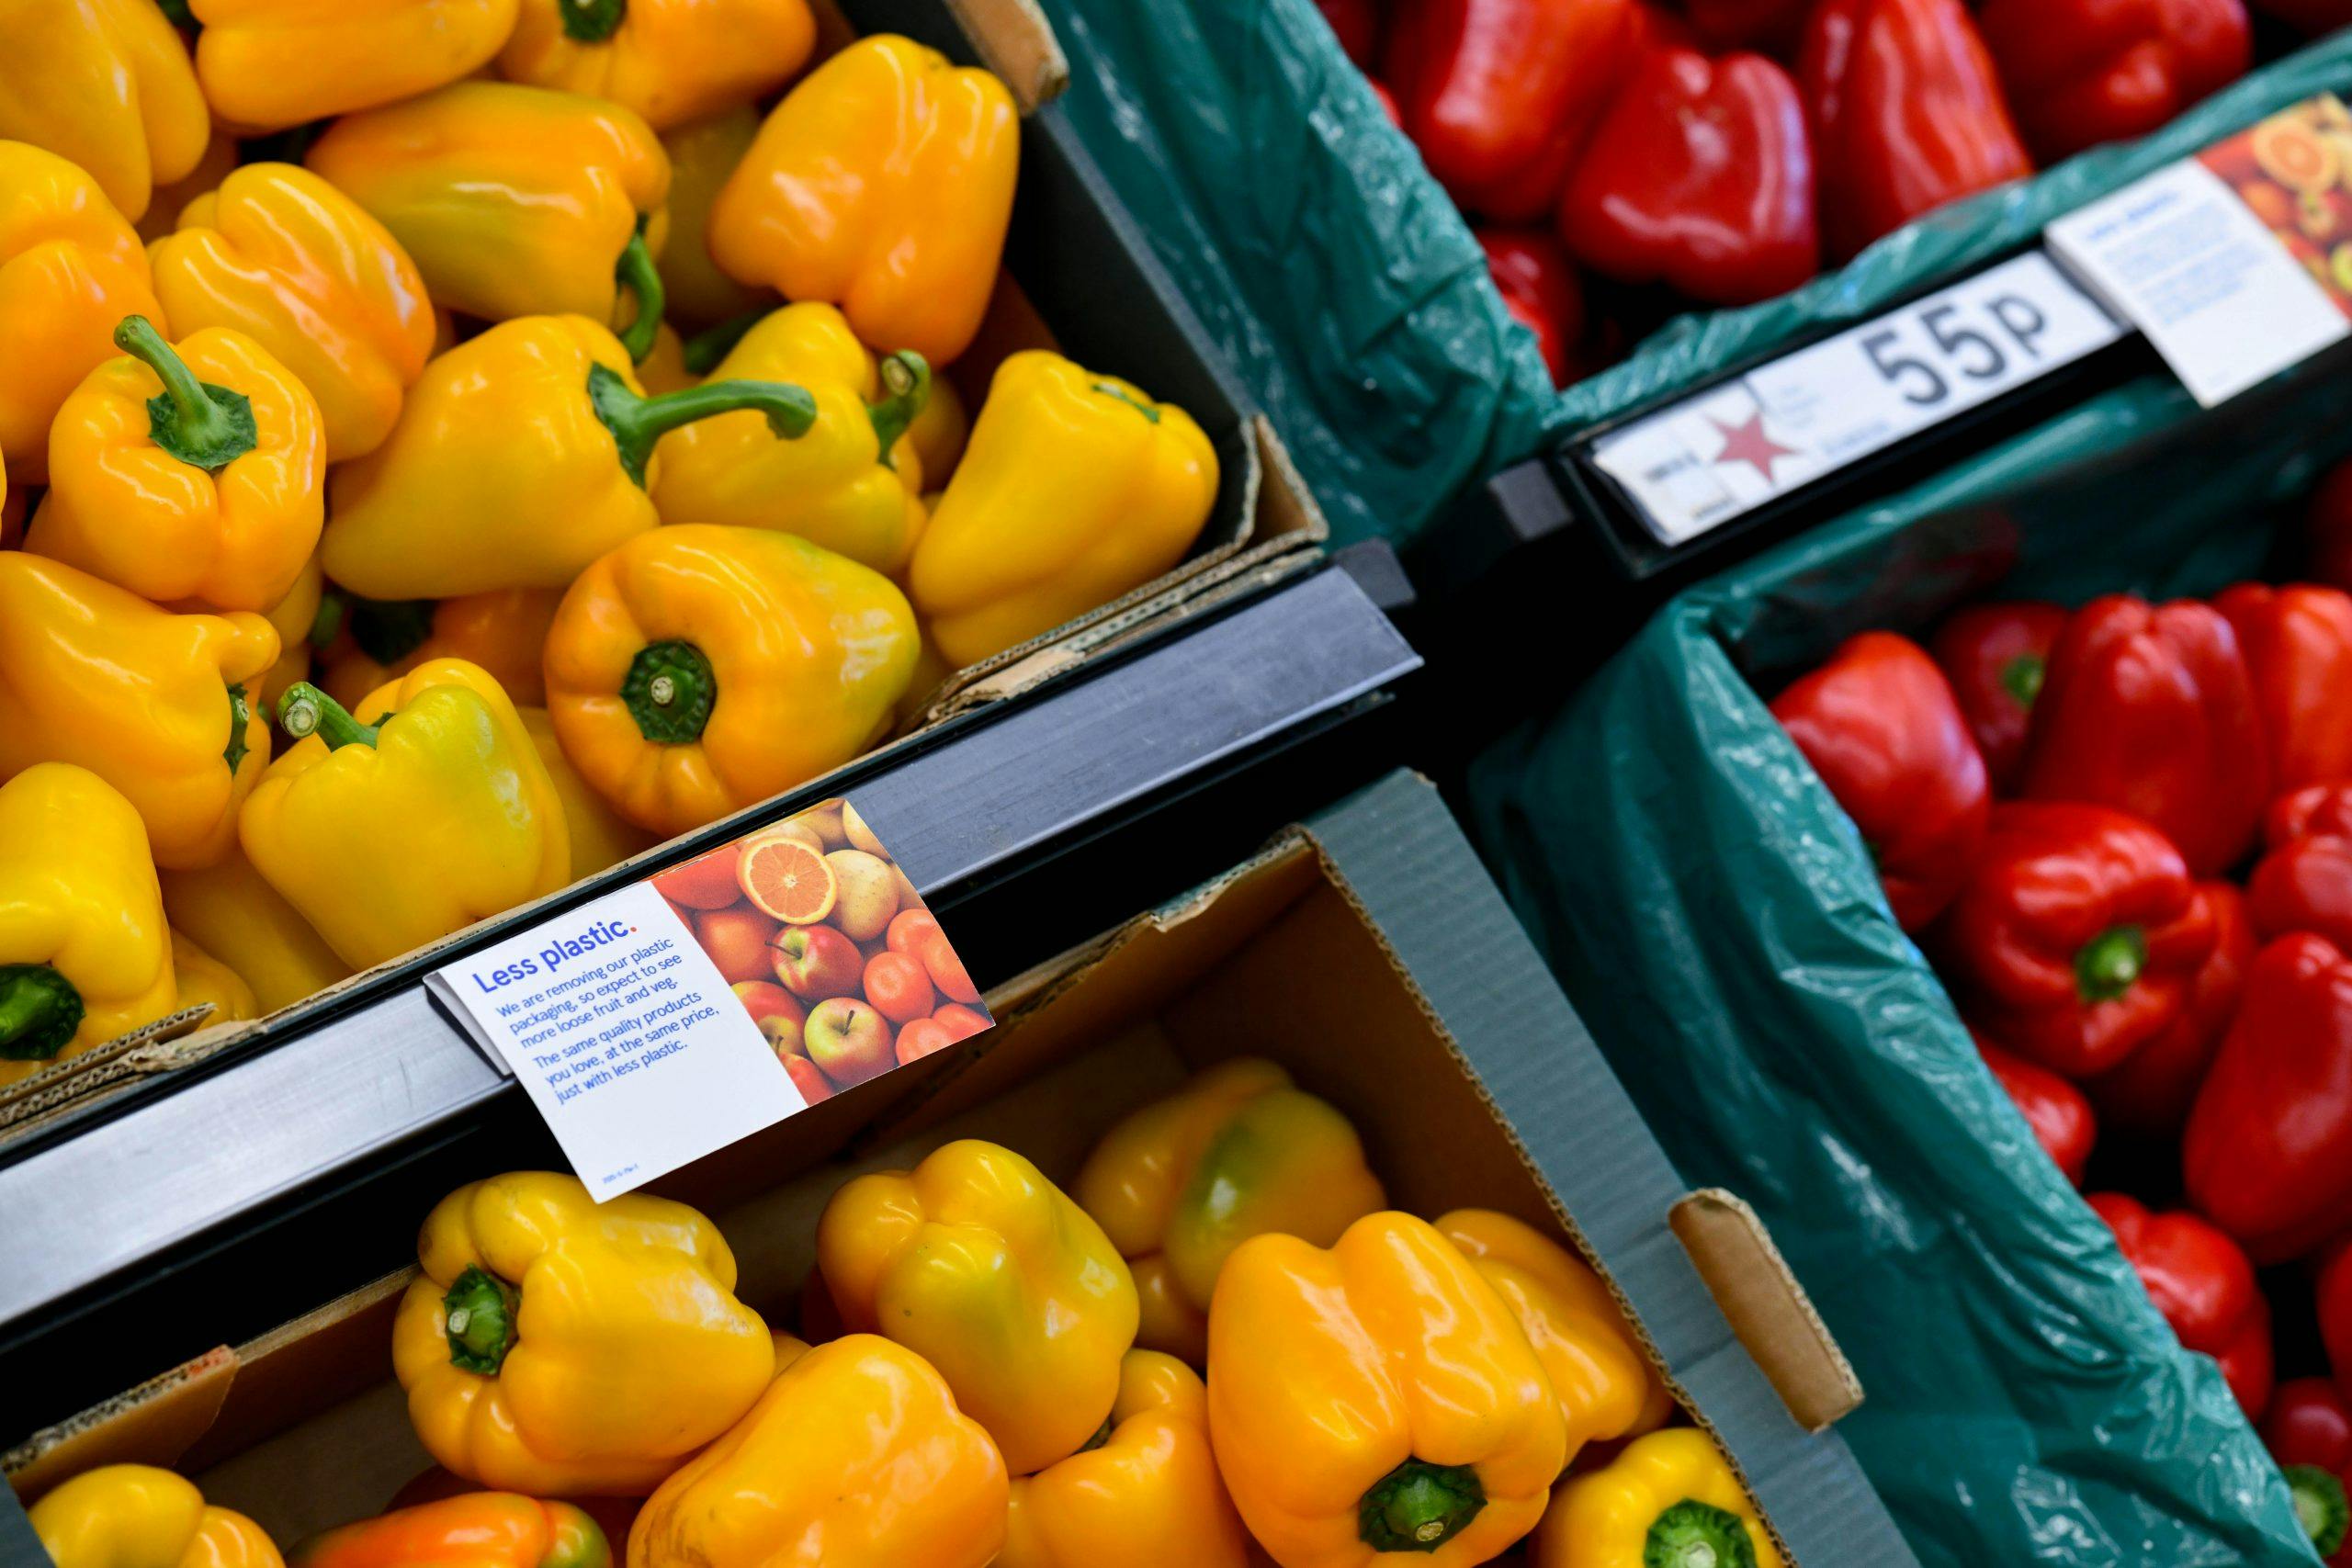 Tesco Reduces Plastic for Produce